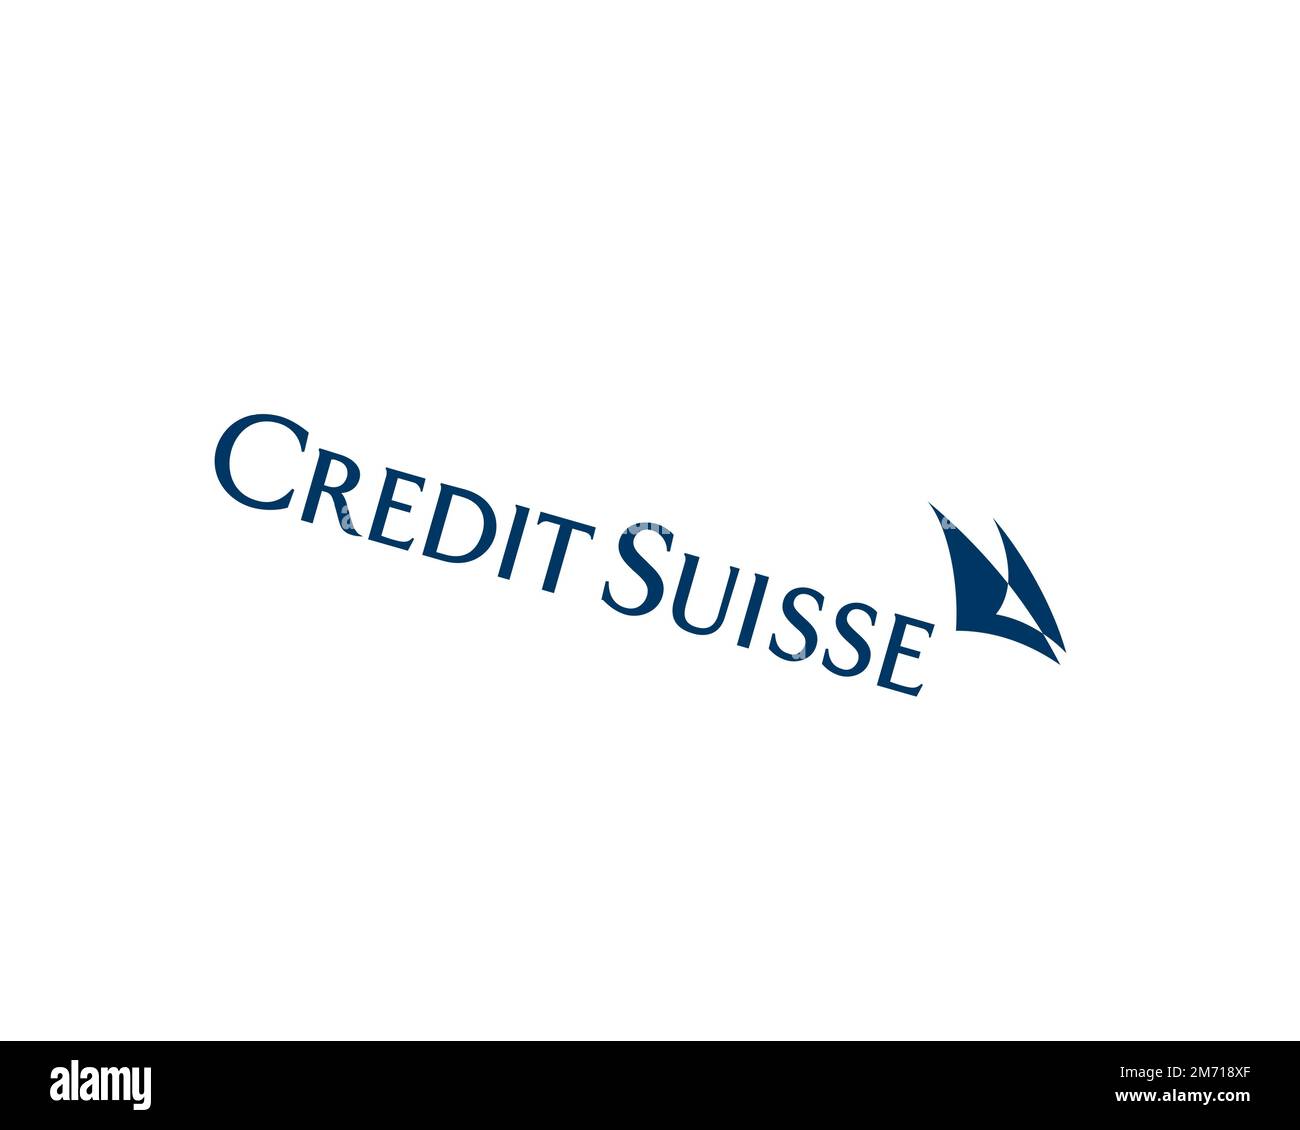 Credit Suisse, rotated logo, white background B Stock Photo